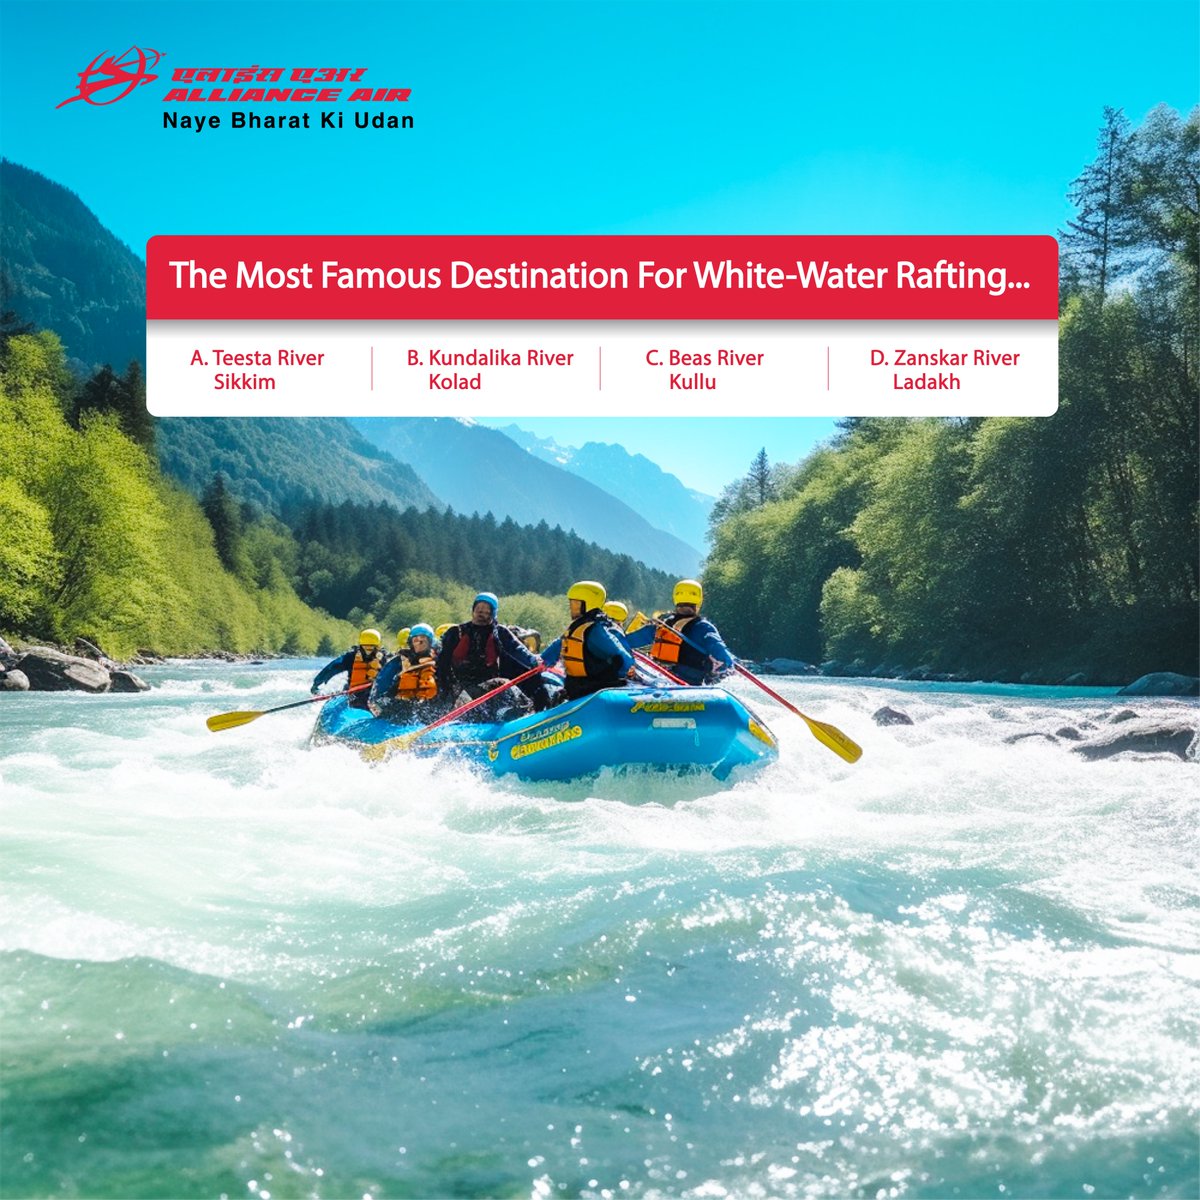 Rafting is a once-in-a-lifetime experience that you would love to experience again and again. For bookings- allianceair.in/book or please contact +91-4442554255 or +91-4435113511 #AllianceAir #Explore #Travel #YourWindowToIndia #aviation #dekhoapnadesh #india #travelling